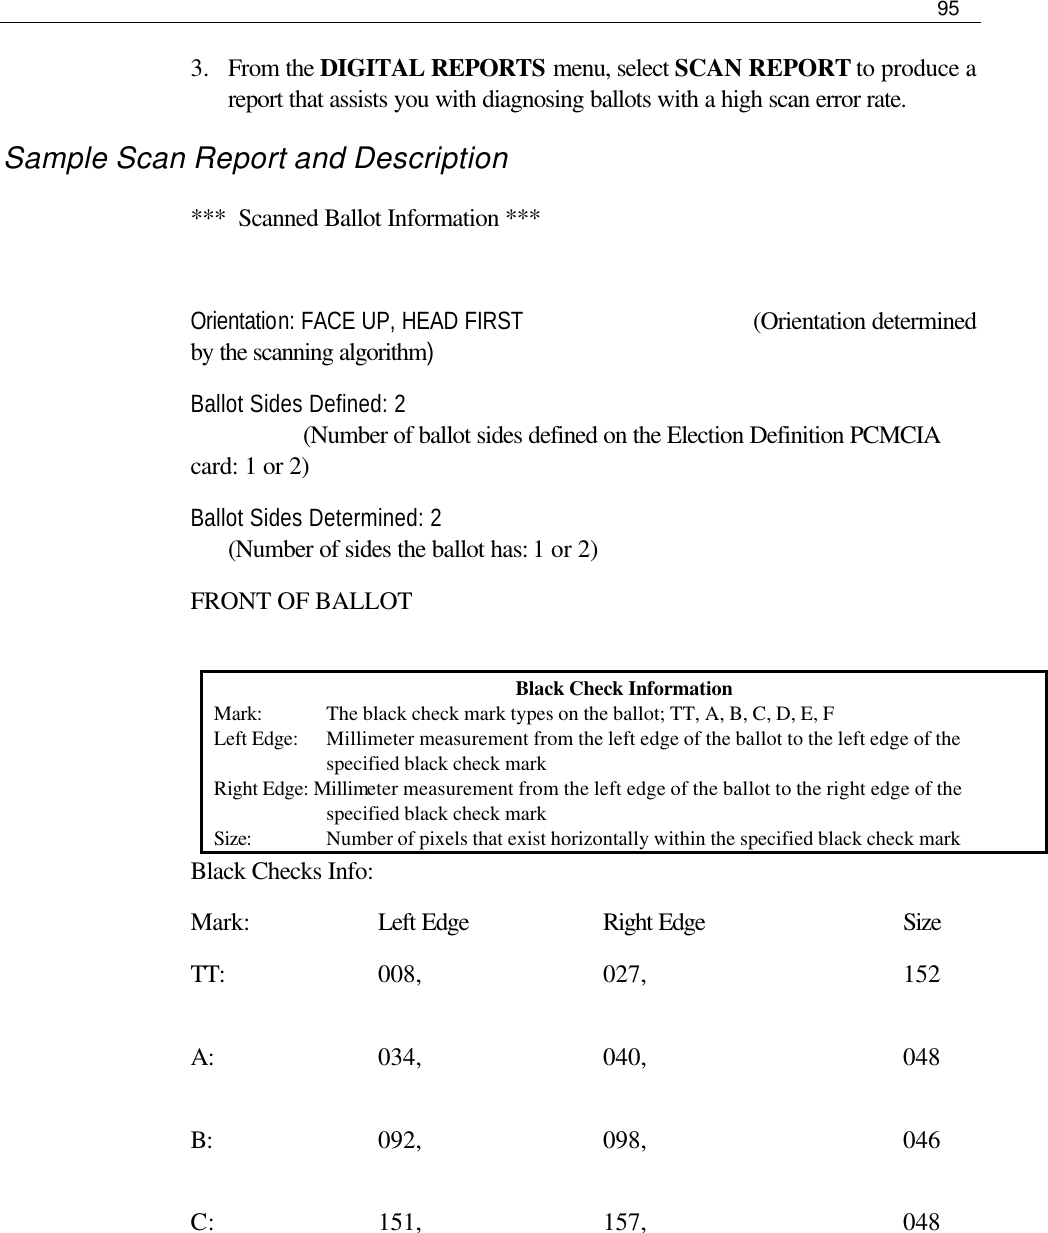     95  3.  From the DIGITAL REPORTS menu, select SCAN REPORT to produce a report that assists you with diagnosing ballots with a high scan error rate.  Sample Scan Report and Description ***  Scanned Ballot Information ***  Orientation: FACE UP, HEAD FIRST    (Orientation determined by the scanning algorithm) Ballot Sides Defined: 2            (Number of ballot sides defined on the Election Definition PCMCIA card: 1 or 2) Ballot Sides Determined: 2        (Number of sides the ballot has: 1 or 2) FRONT OF BALLOT  Black Checks Info: Mark:    Left Edge    Right Edge   Size TT:     008,      027,        152        A:      034,      040,        048        B:      092,      098,        046        C:      151,      157,        048          Black Check Information Mark:  The black check mark types on the ballot; TT, A, B, C, D, E, F Left Edge:  Millimeter measurement from the left edge of the ballot to the left edge of the specified black check mark Right Edge: Millimeter measurement from the left edge of the ballot to the right edge of the specified black check mark Size:  Number of pixels that exist horizontally within the specified black check mark 